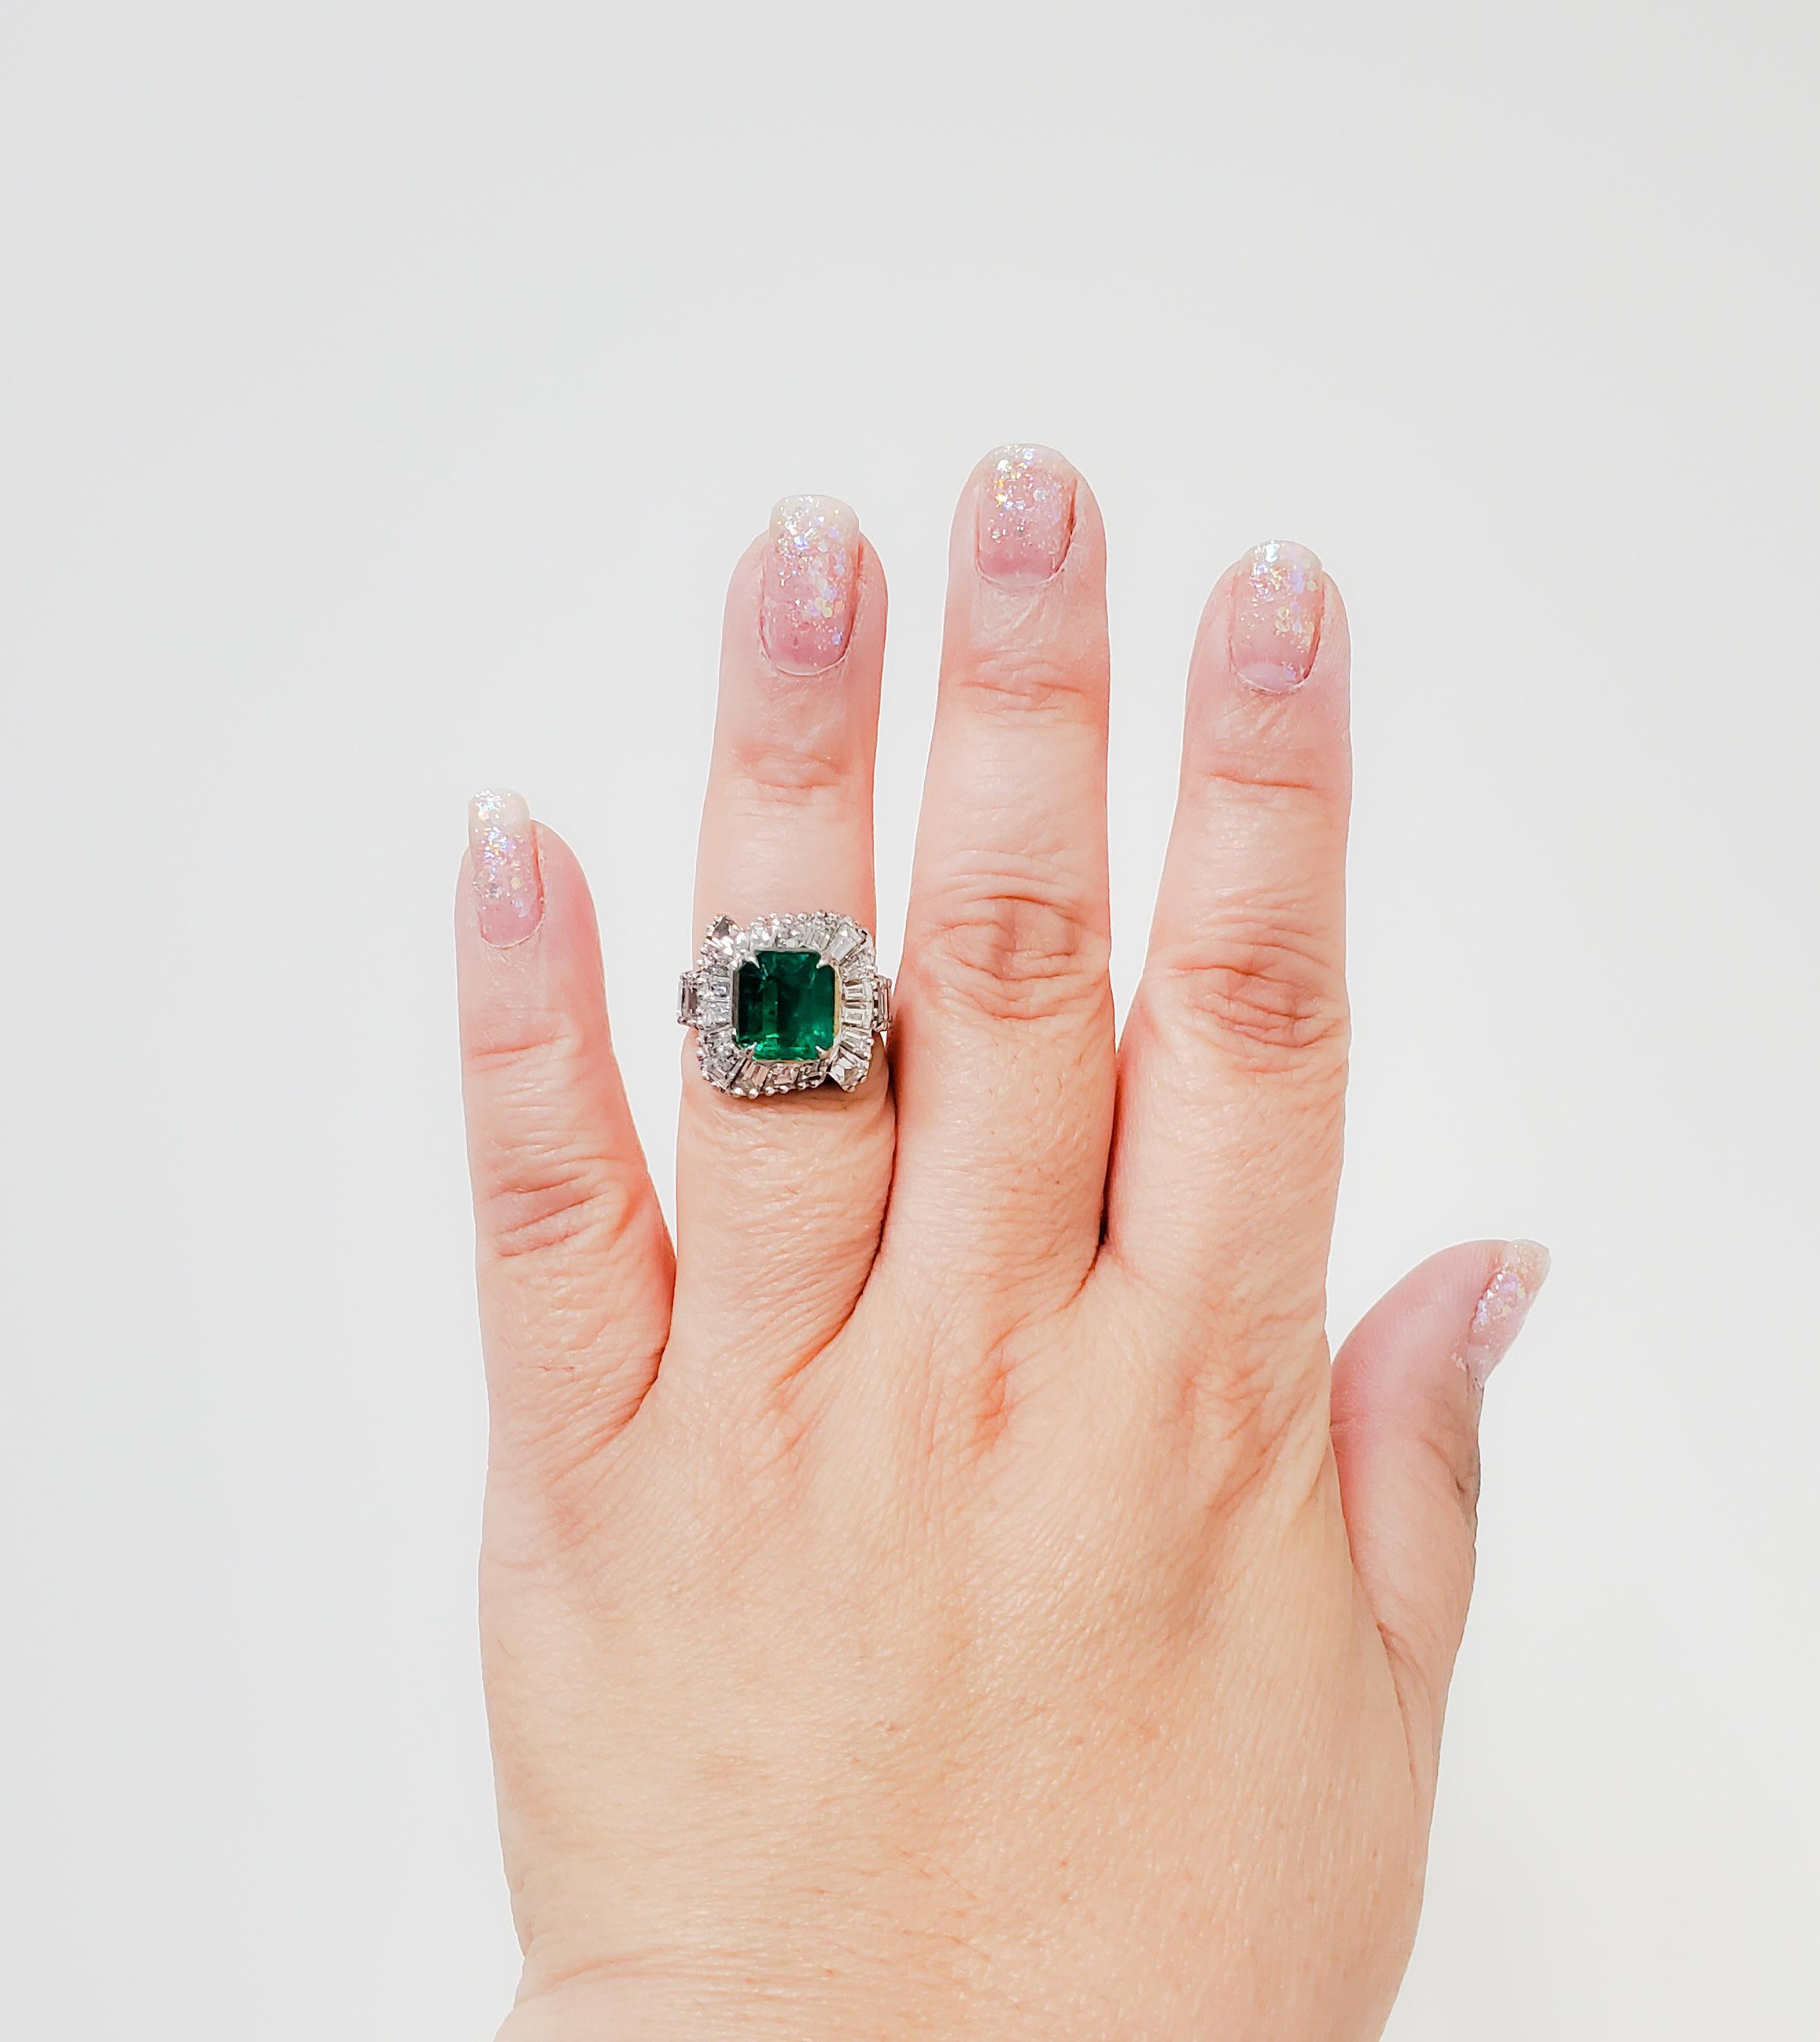 Spectacular deep green with bright crystal Colombian emerald rectangular emerald cut weighing 3.69 ct. with 2.00 ct. of good quality white and bright diamond baguettes and emerald cuts in a handcrafted platinum mounting.  Ring size is 6.5.  Such a